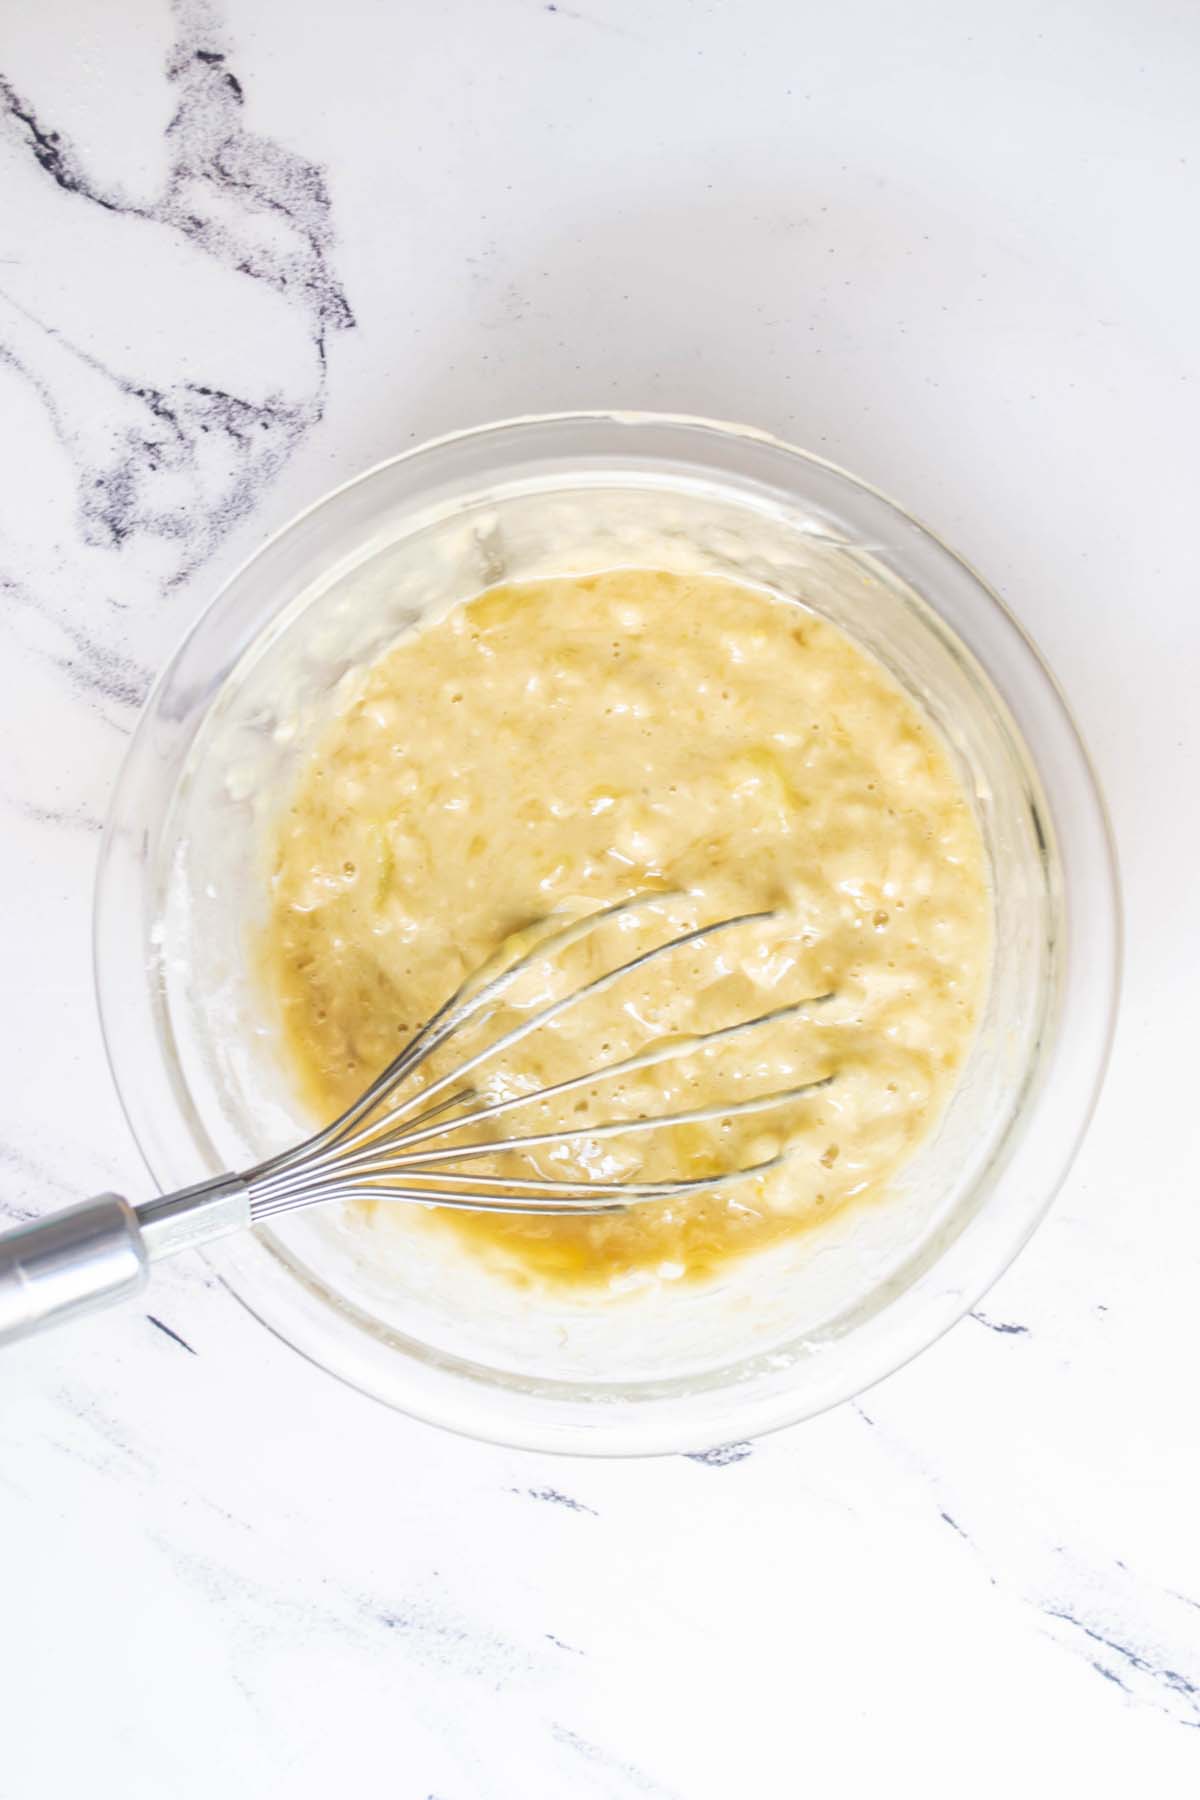 Banana bread batter whisked together in a mixing bowl.